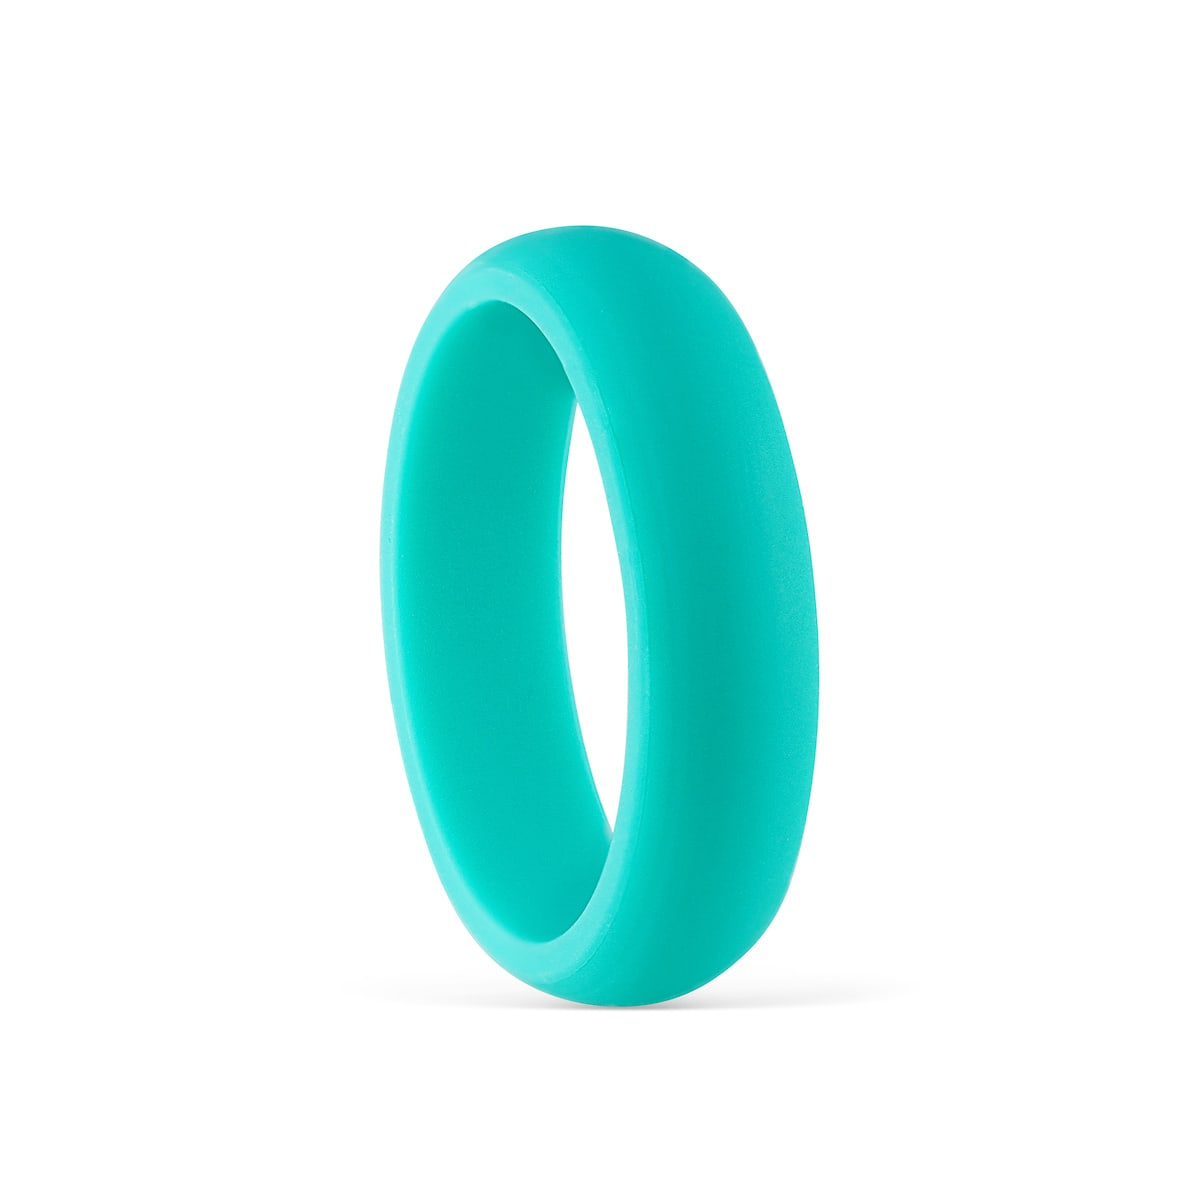 Enso Rings Review - Petite Fit and Why to wear in Healthcare